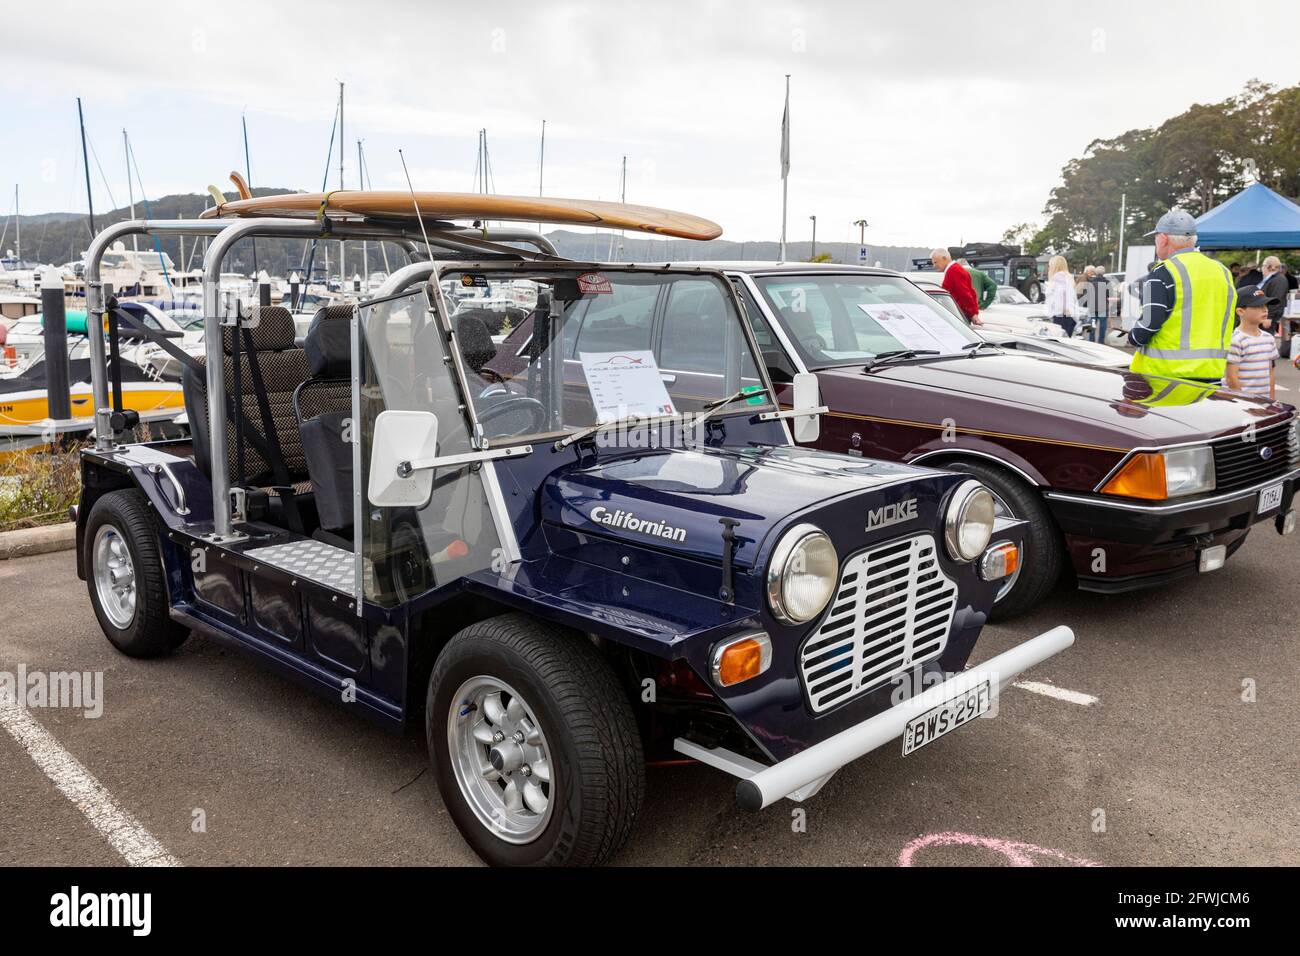 1981 British leyland Mini moke californian with surfboard on the roof at an Australian classic car show in Sydney Stock Photo